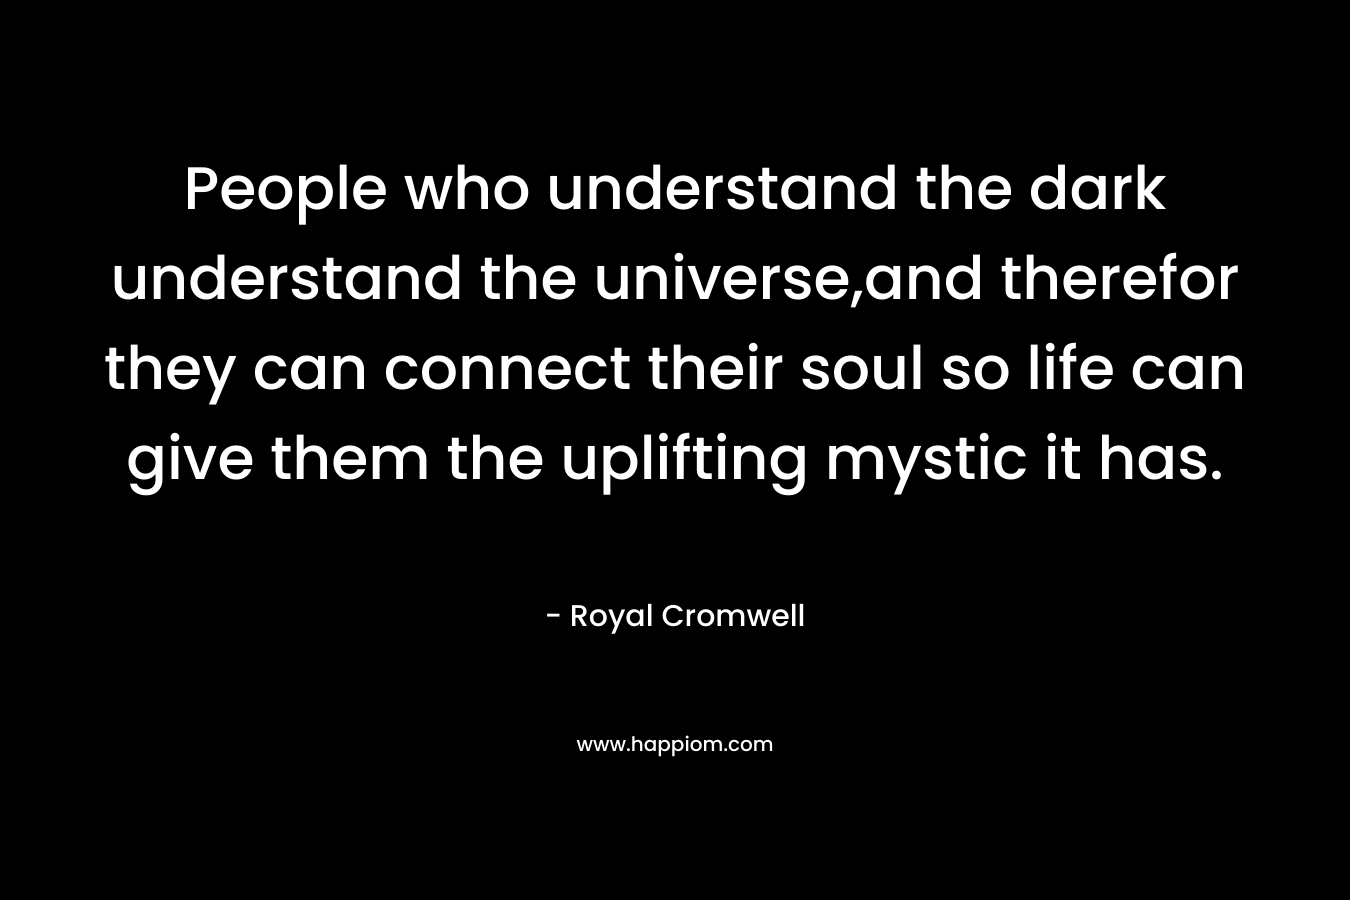 People who understand the dark understand the universe,and therefor they can connect their soul so life can give them the uplifting mystic it has. – Royal Cromwell